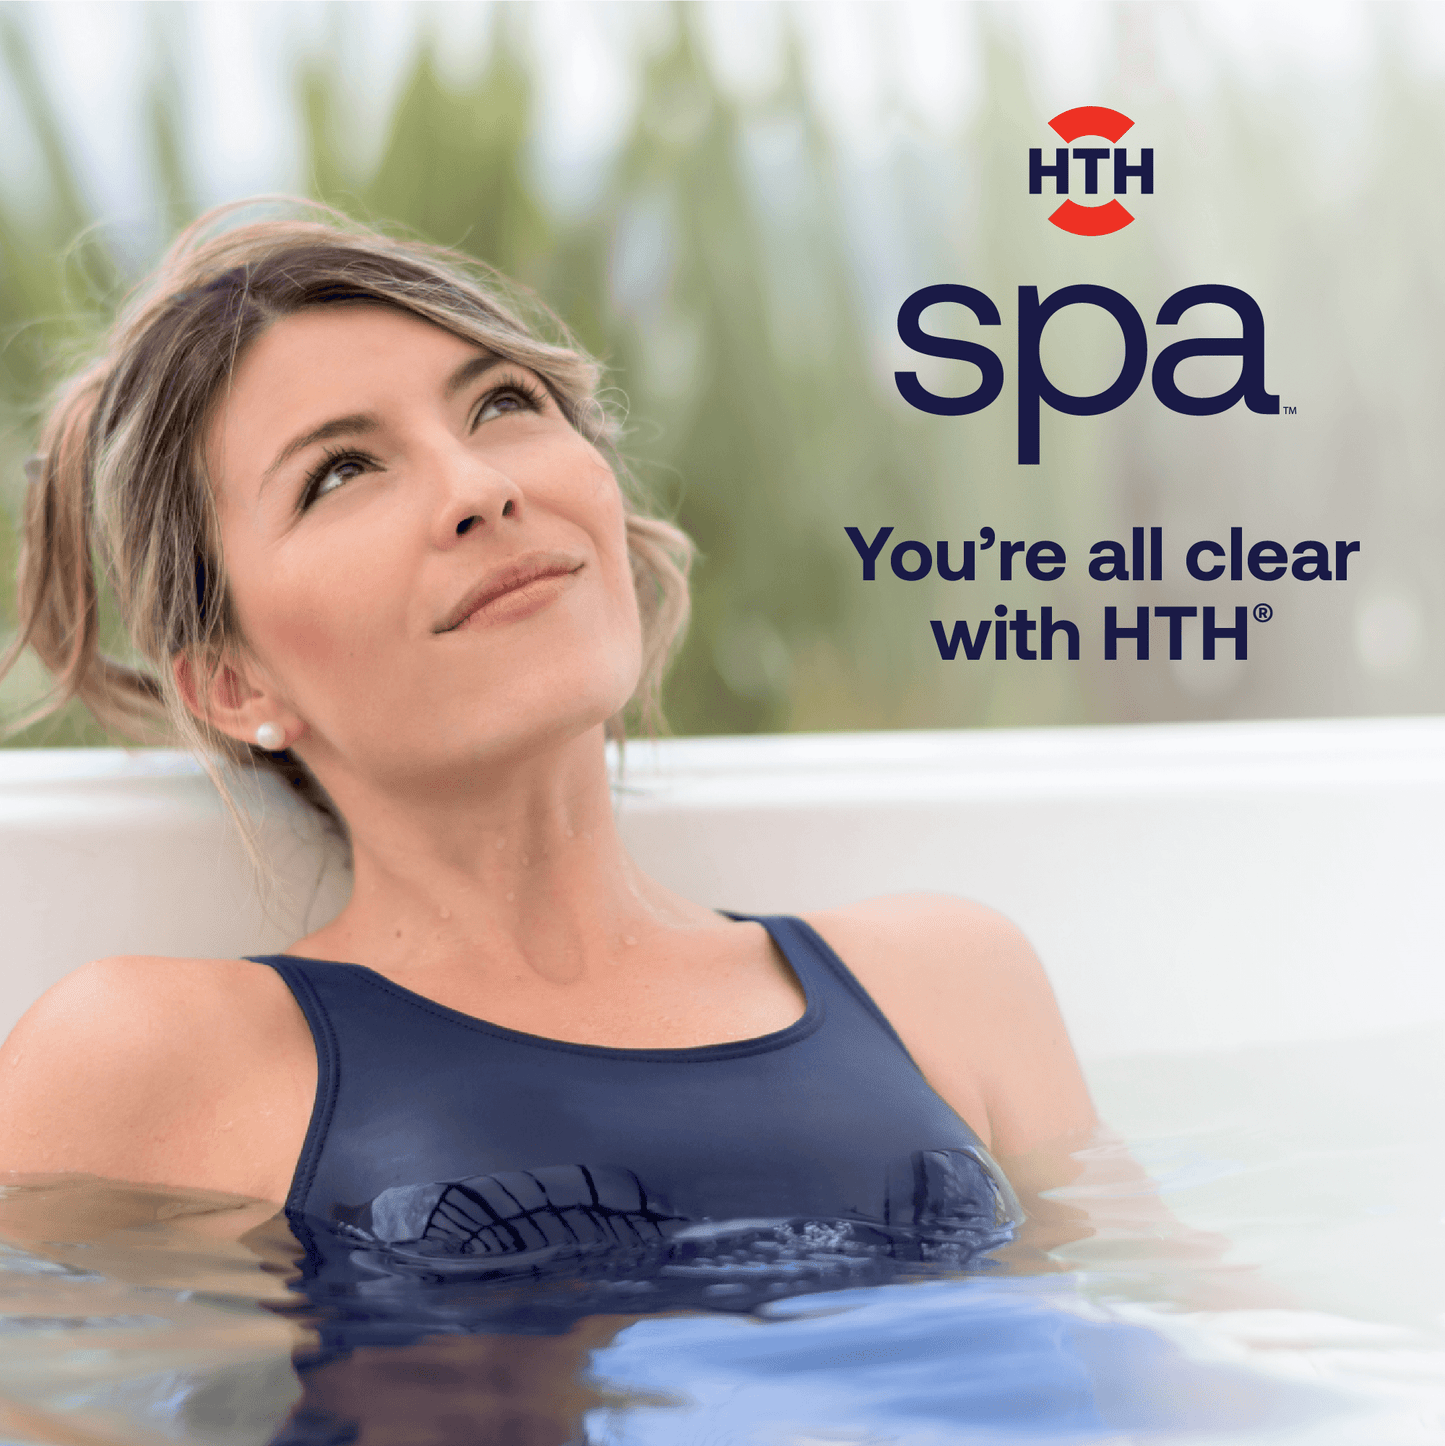 HTH spa™ Care Bromine Tabs: Bromine Tablets for Spa